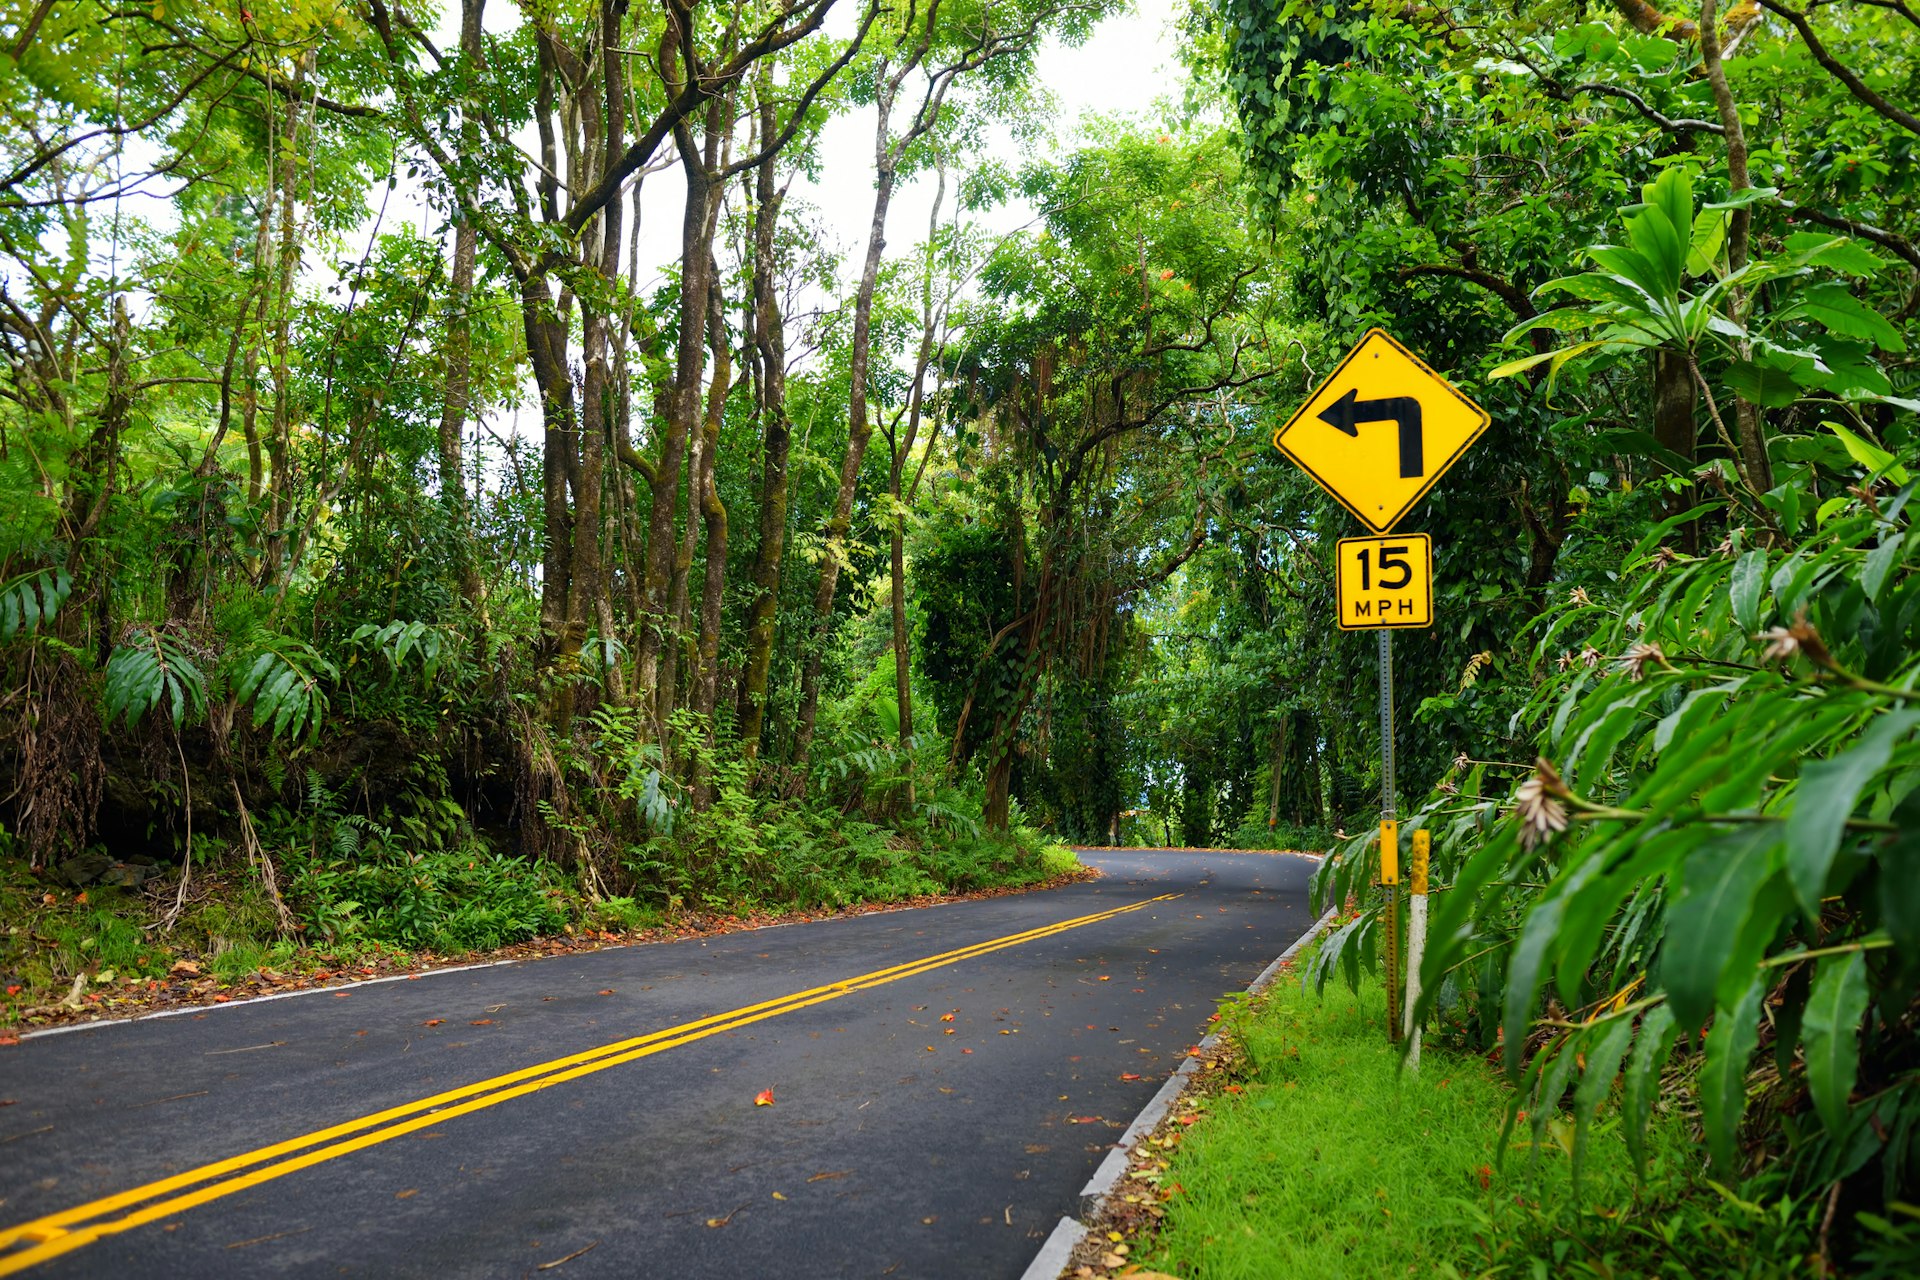 A “slow” curve sign pictured next to Maui’s famous road to Hana, which has narrow one-lane bridges, hairpin turns and incredible island views